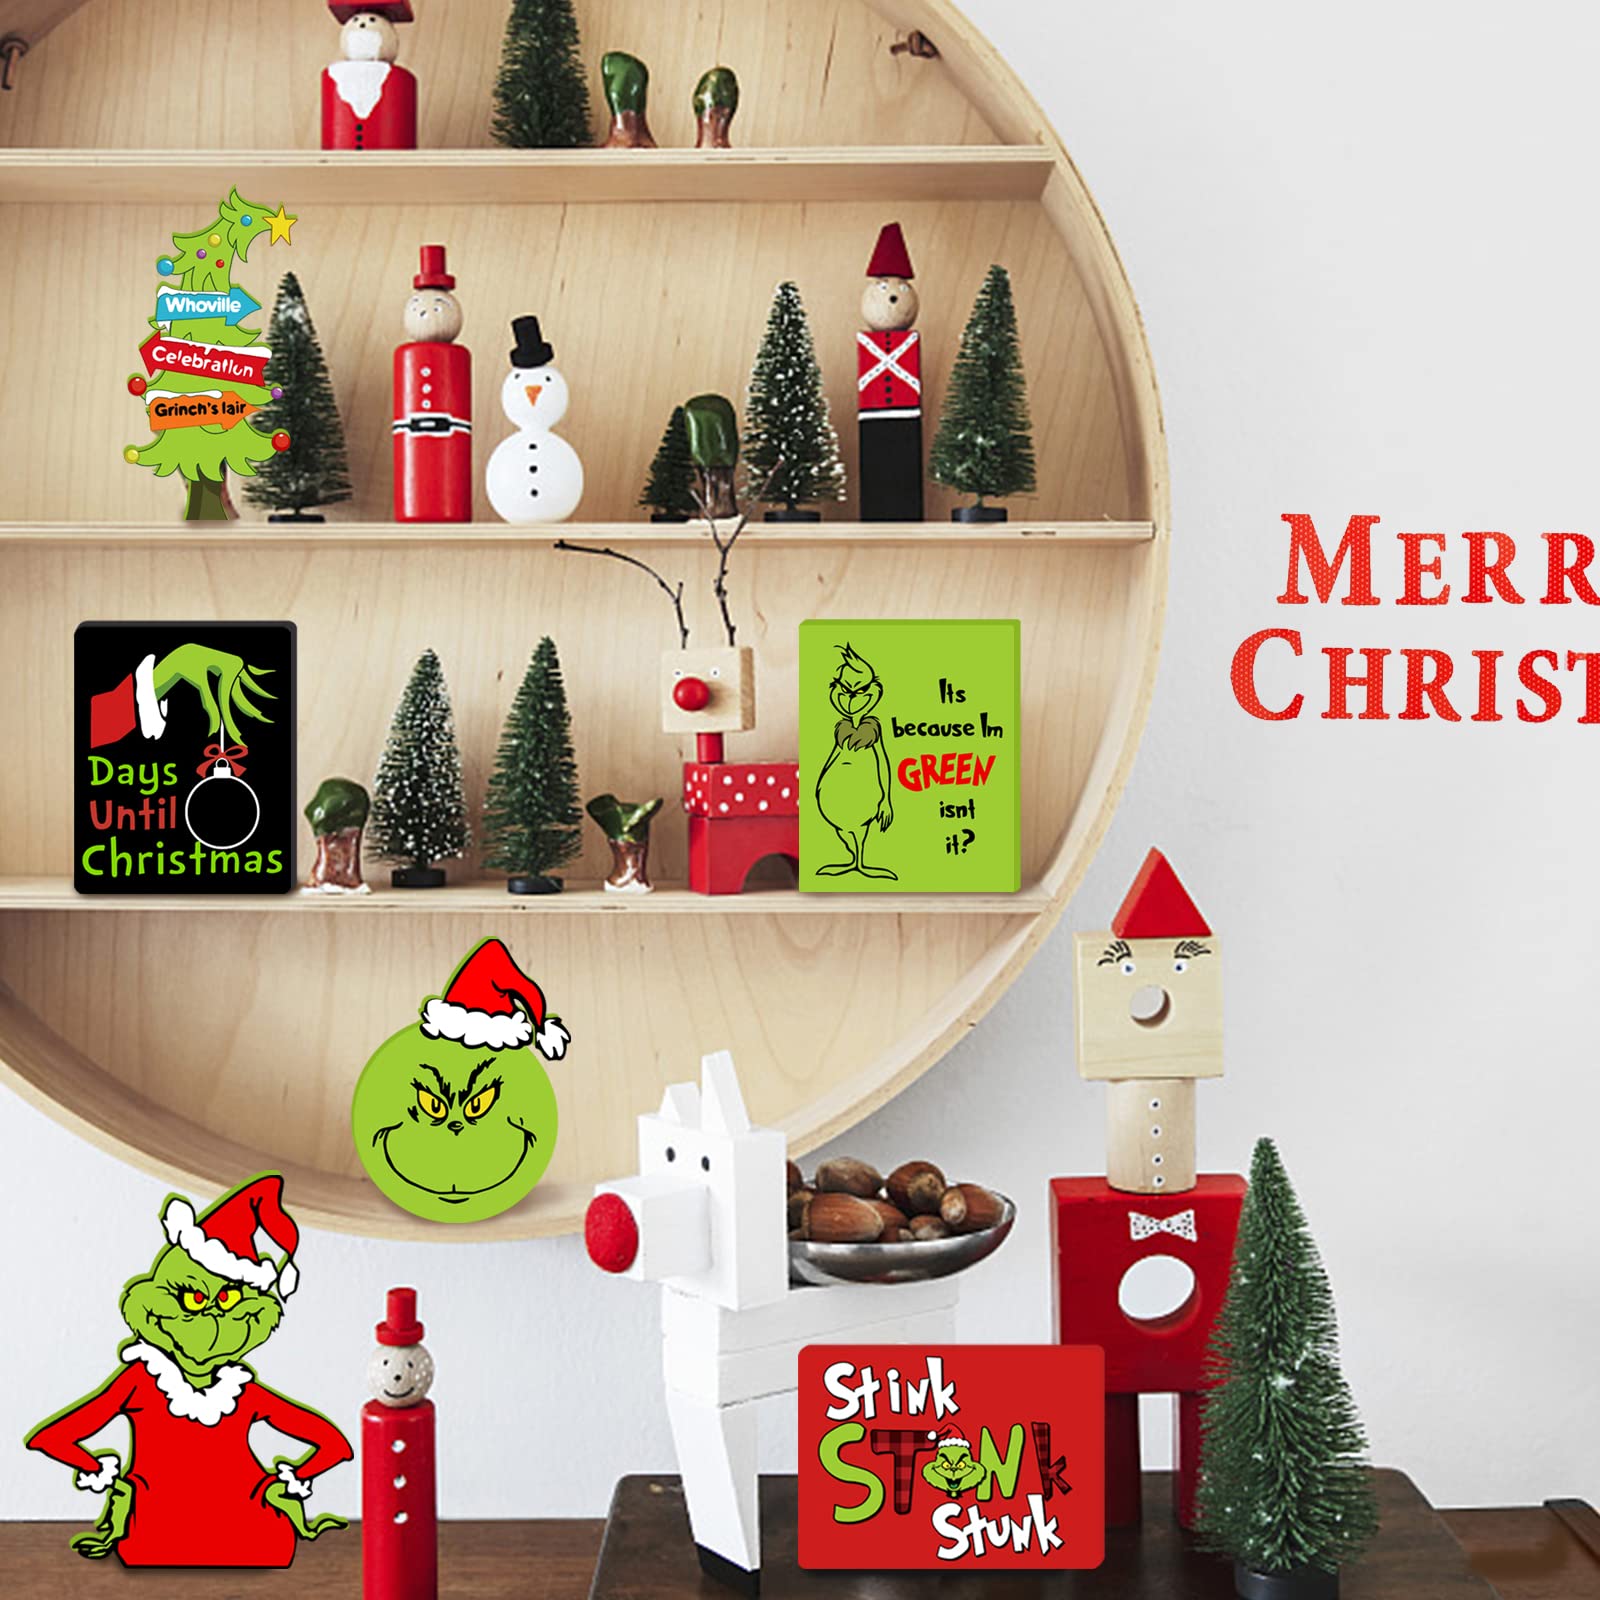 Christmas Tiered Tray Decorations - 6pcs Wooden Signs Table Centerpieces for Holiday Indoor Home Table Top Decorations